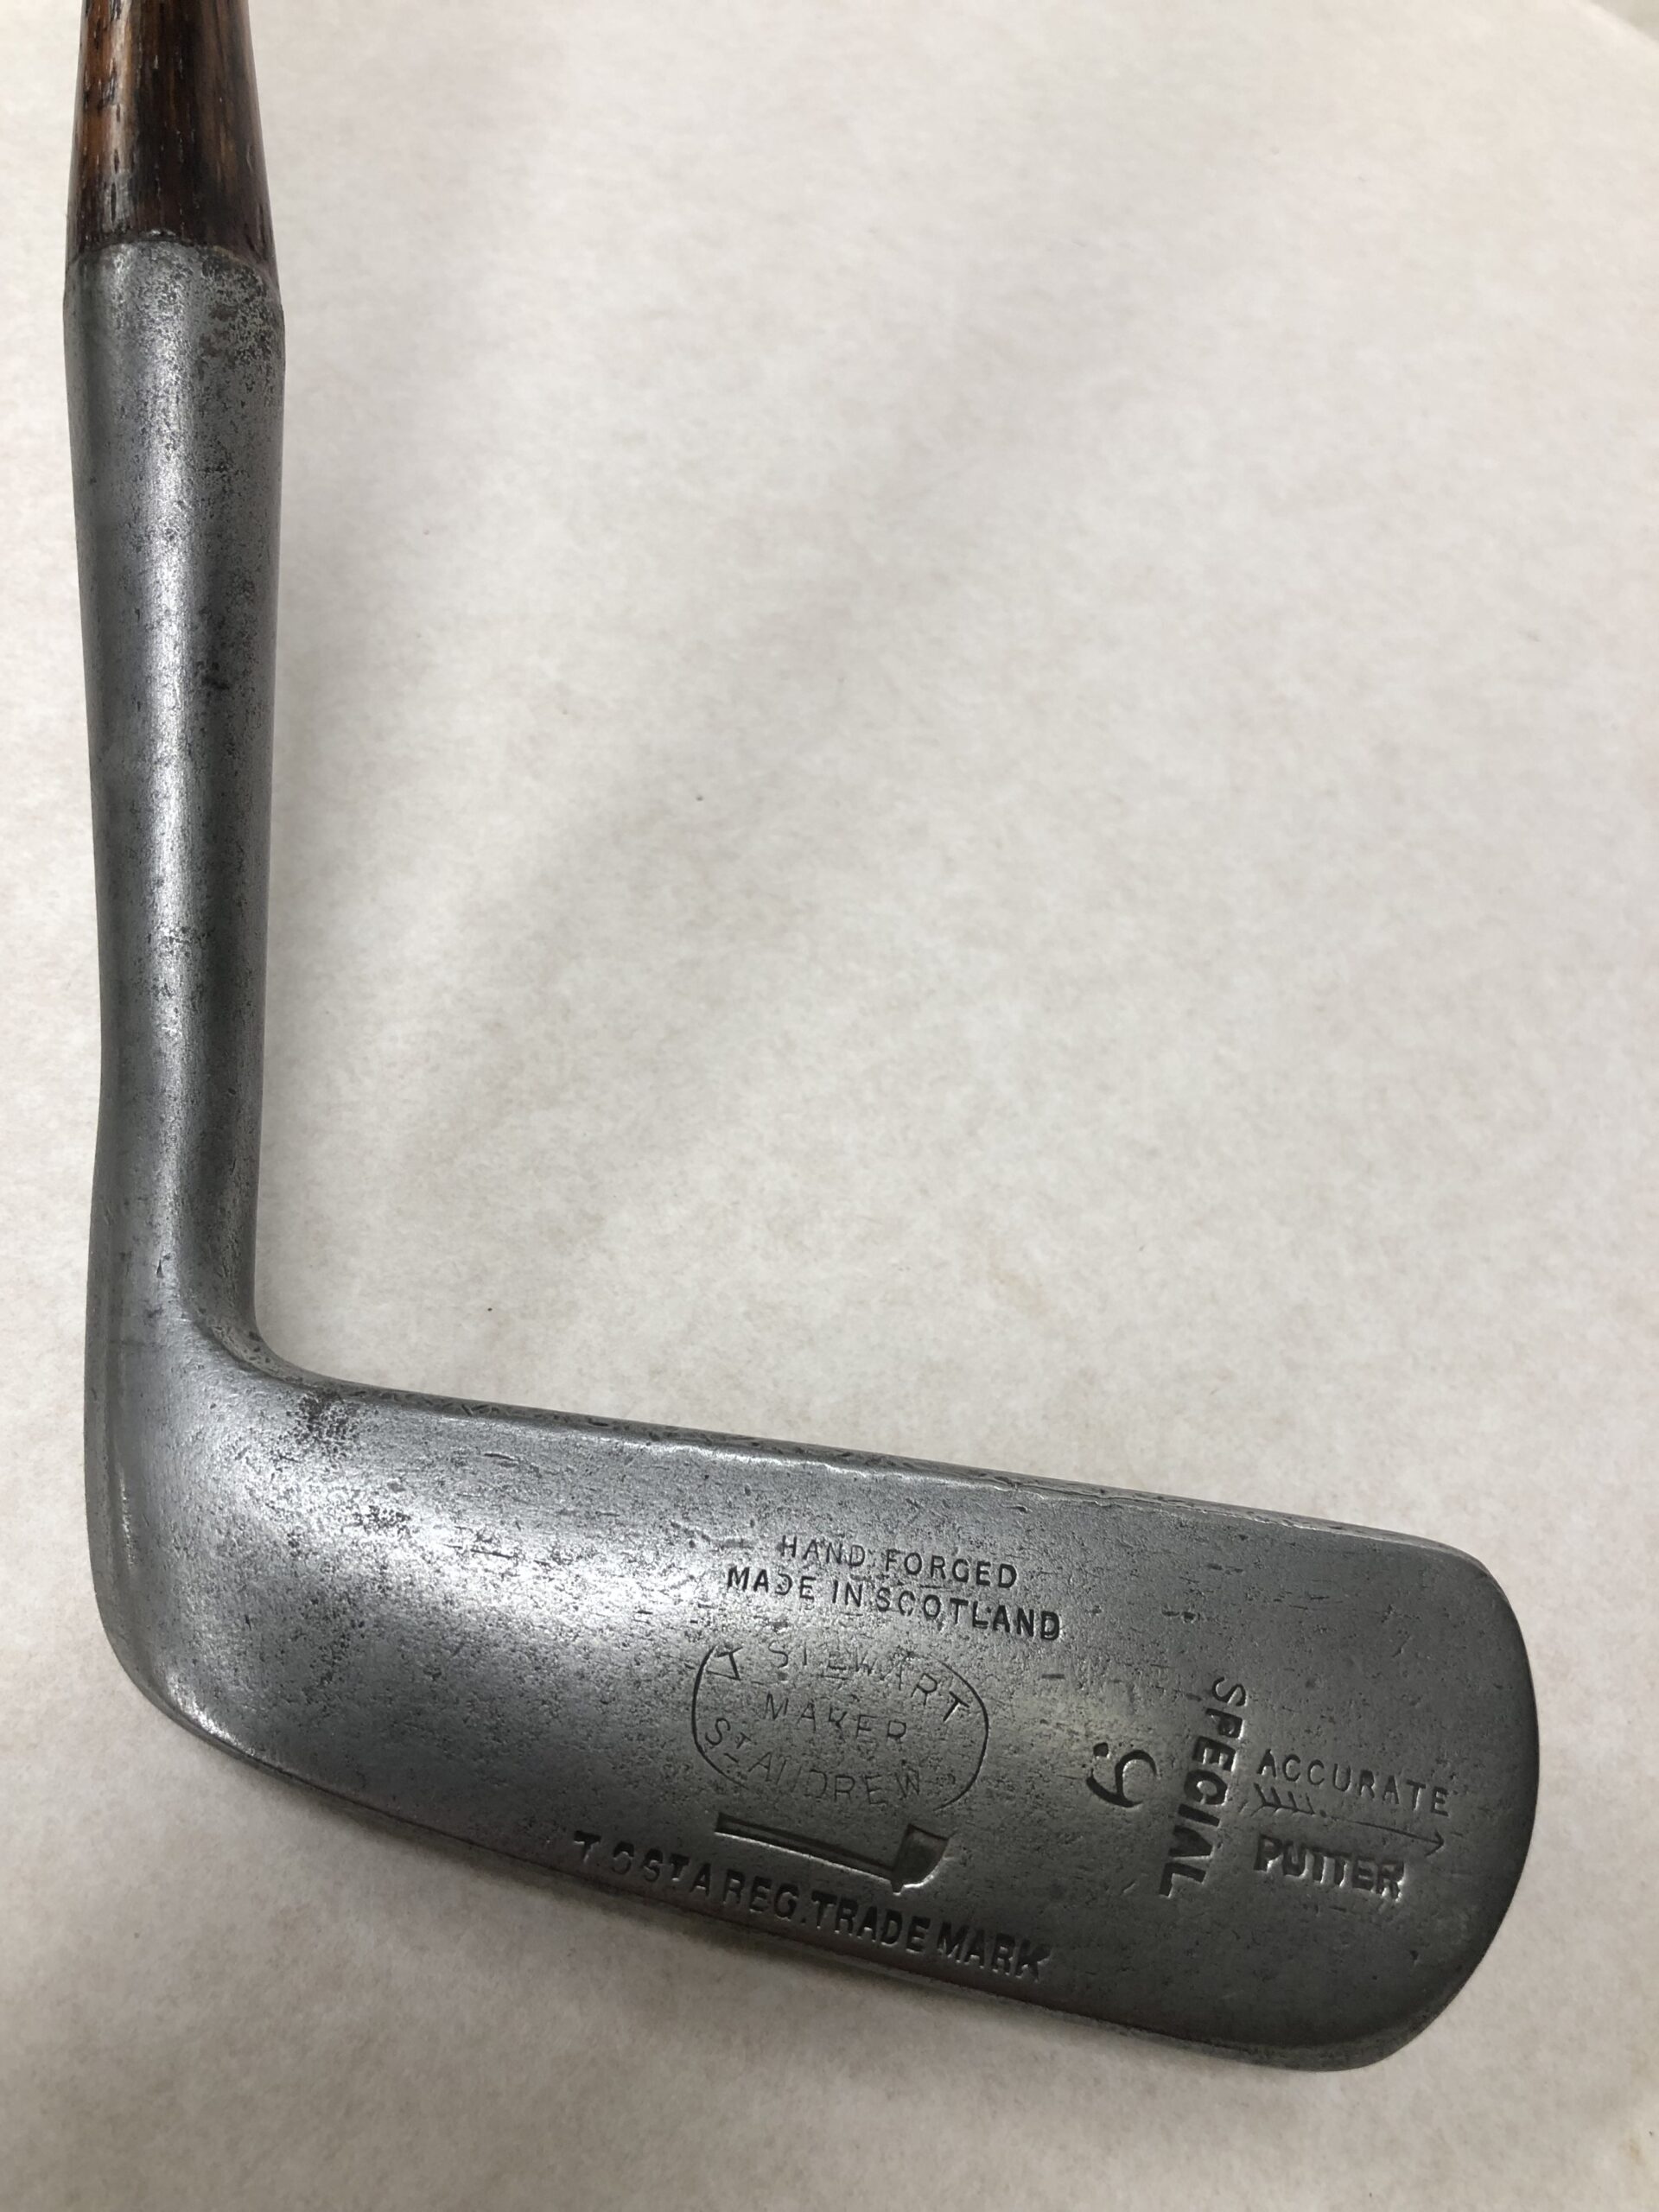 Tom Stewart, St. Andrews Wry-neck 'Accurate' Putter c.1920 with square grip